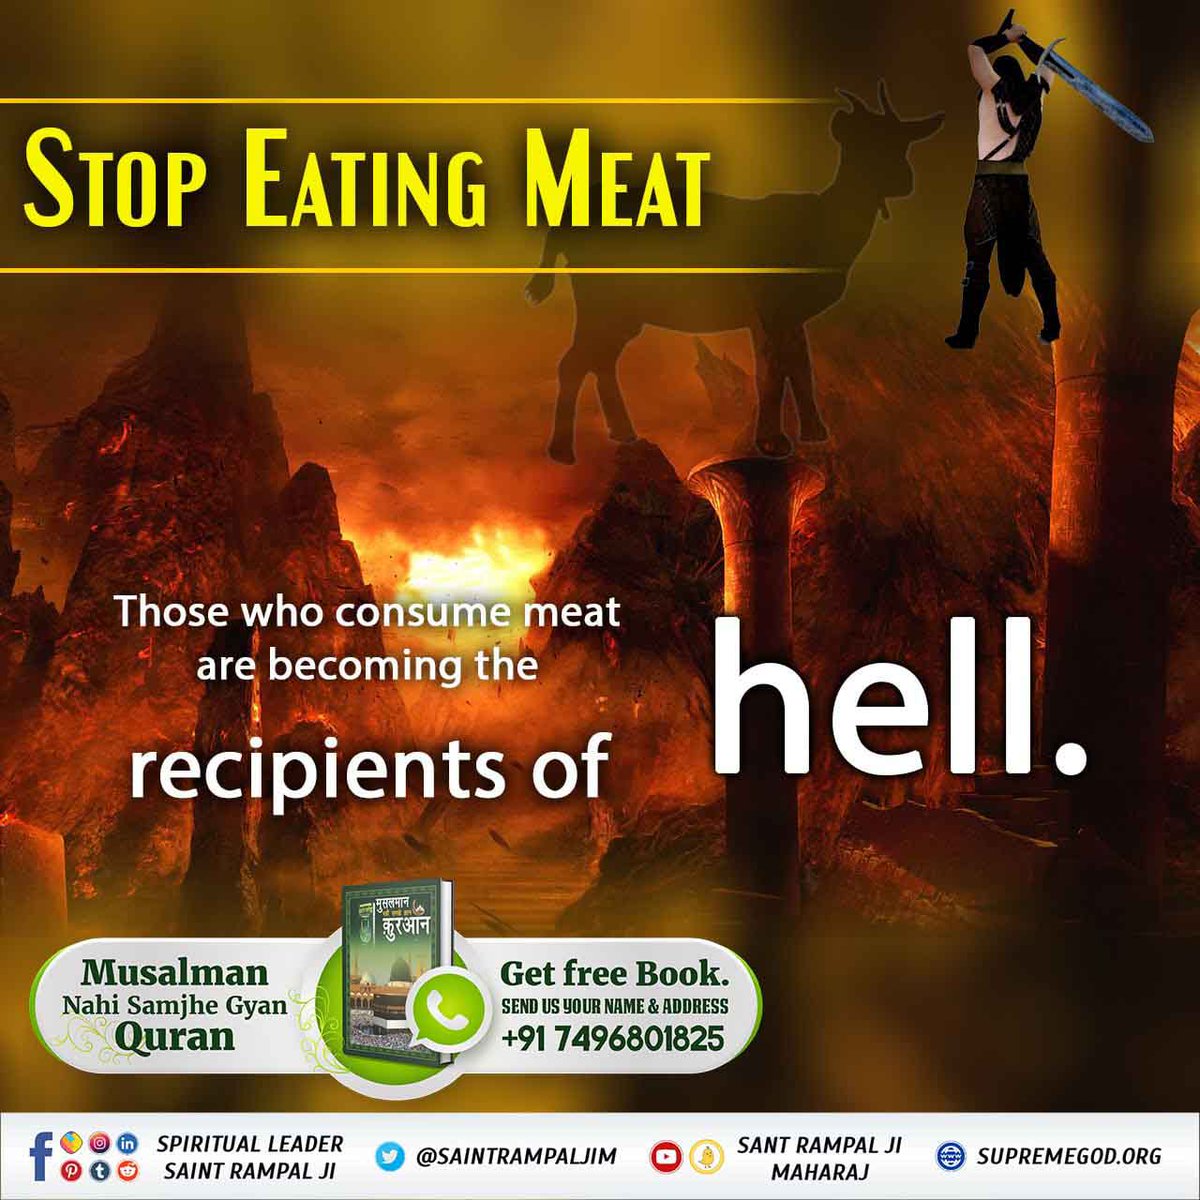 #रहम_करो_मूक_जीवों_पर
STOP EATING MEAT
Those who consume meat
are becoming the
recipients of hell.
💁🏻For more information visit 'Al kabir islamic' Youtube Channel.

Sant RampalJi YouTube Channel